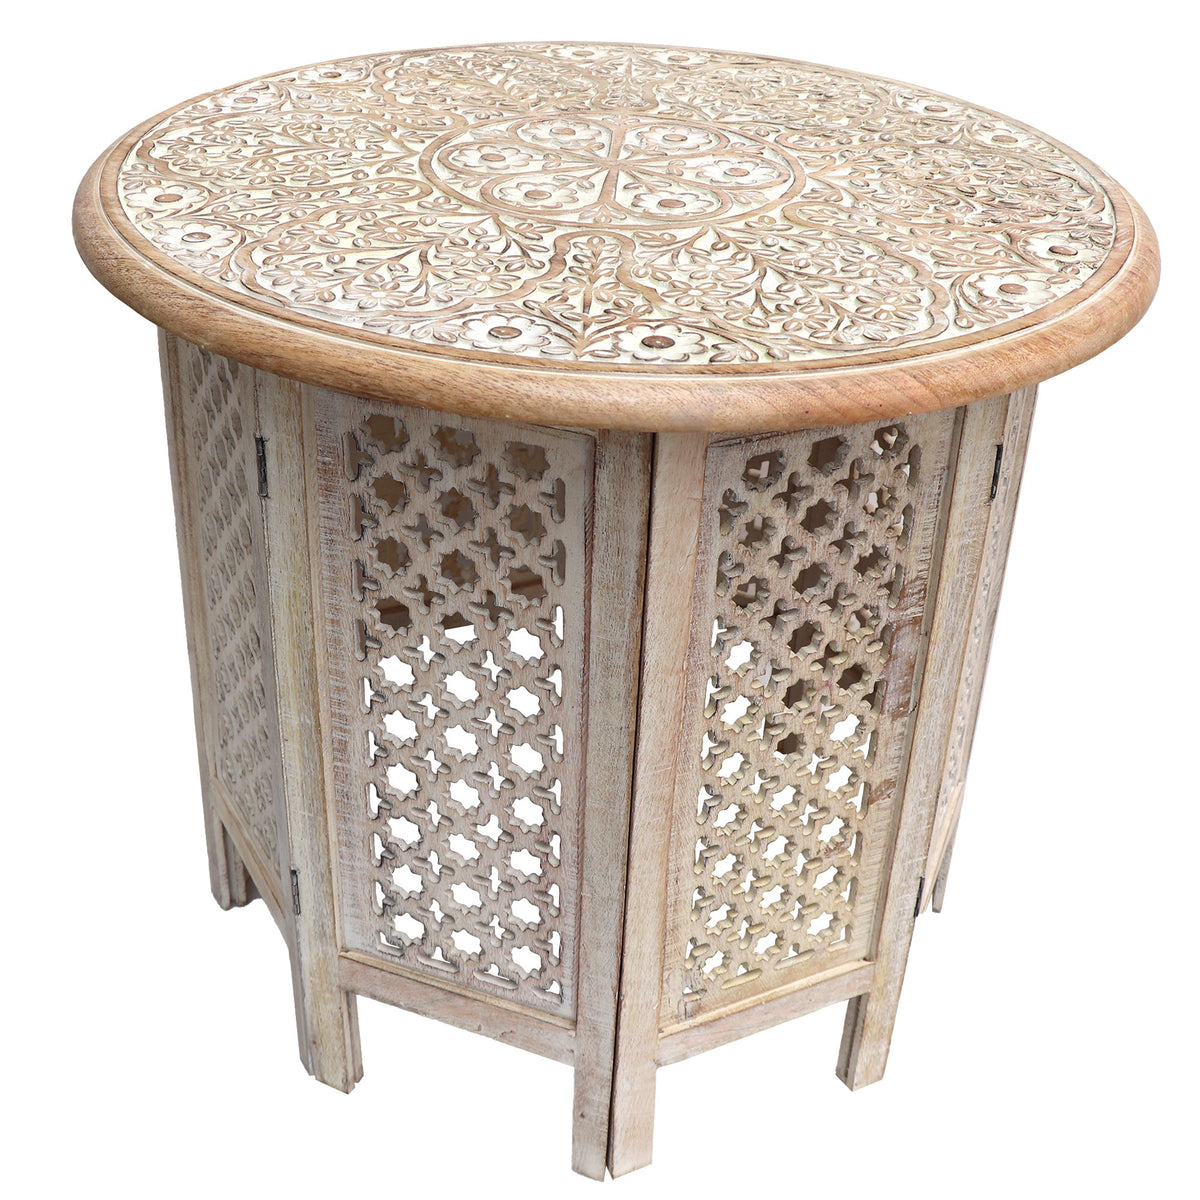 Mesh Cut Out Carved Mango Wood Octagonal Folding Table with Round Top, Antique White and Brown - UPT-209568